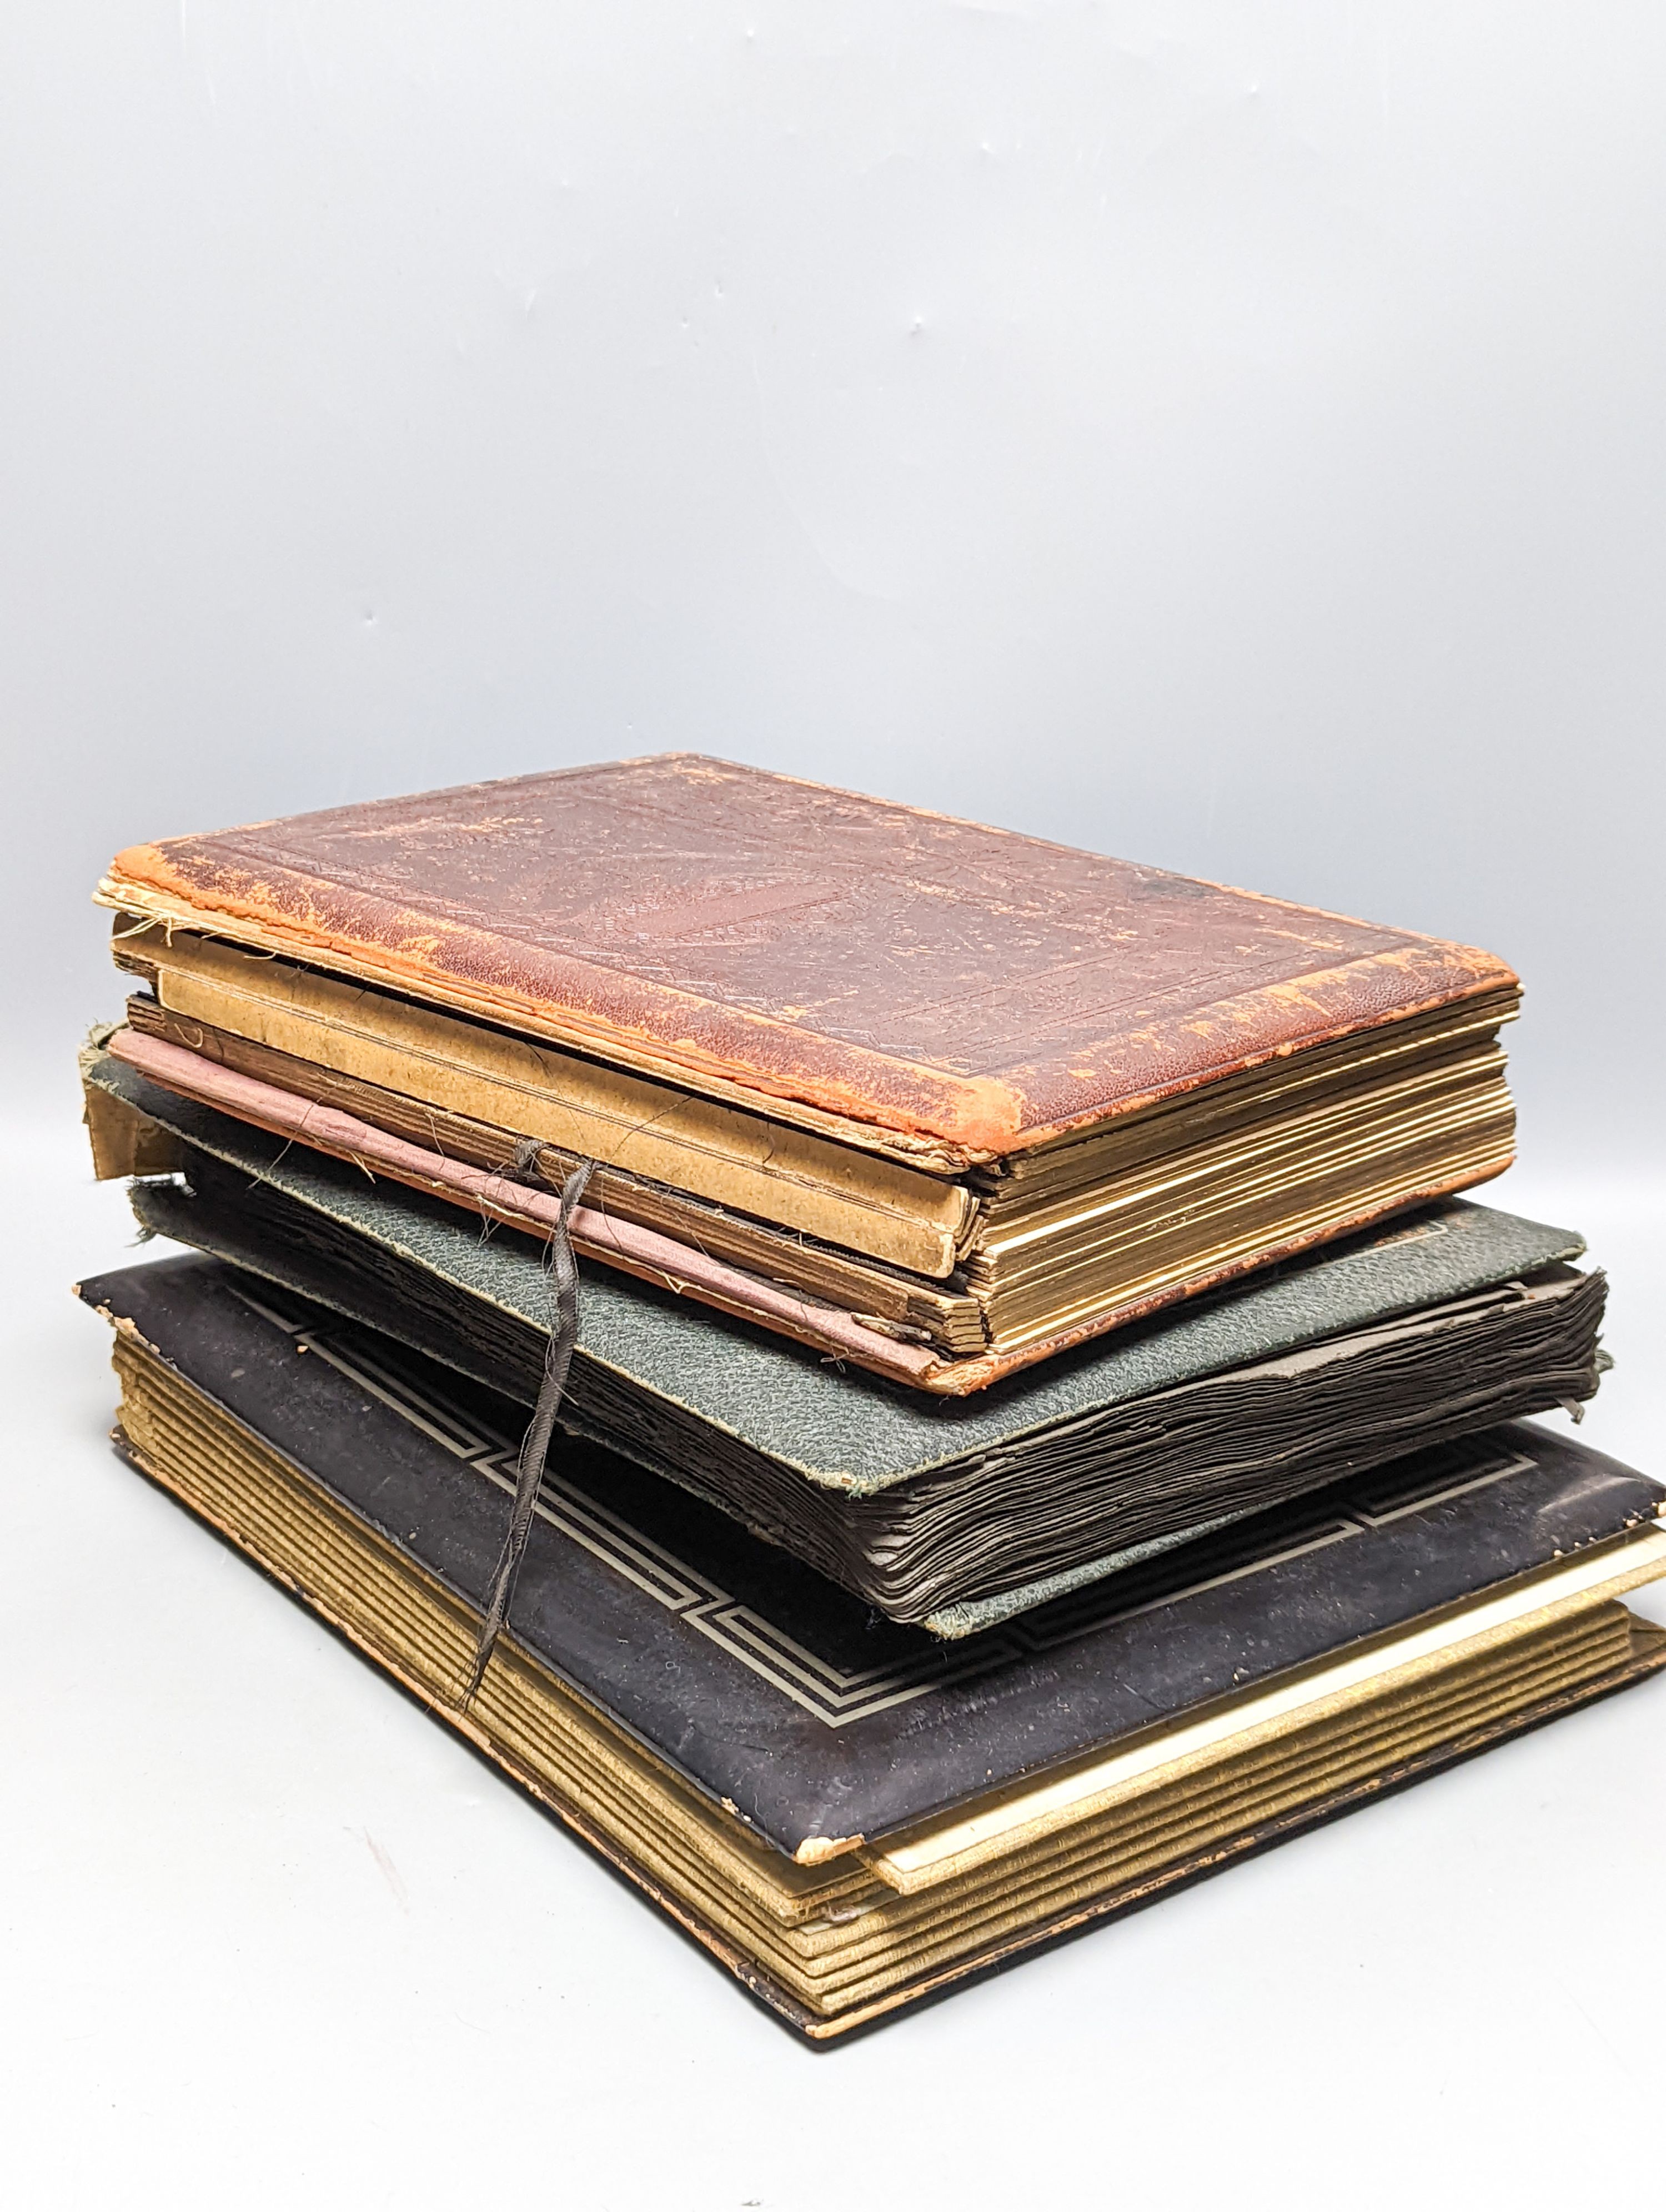 Two early 20th century postcard albums, a photo album and a collection of loose postcards